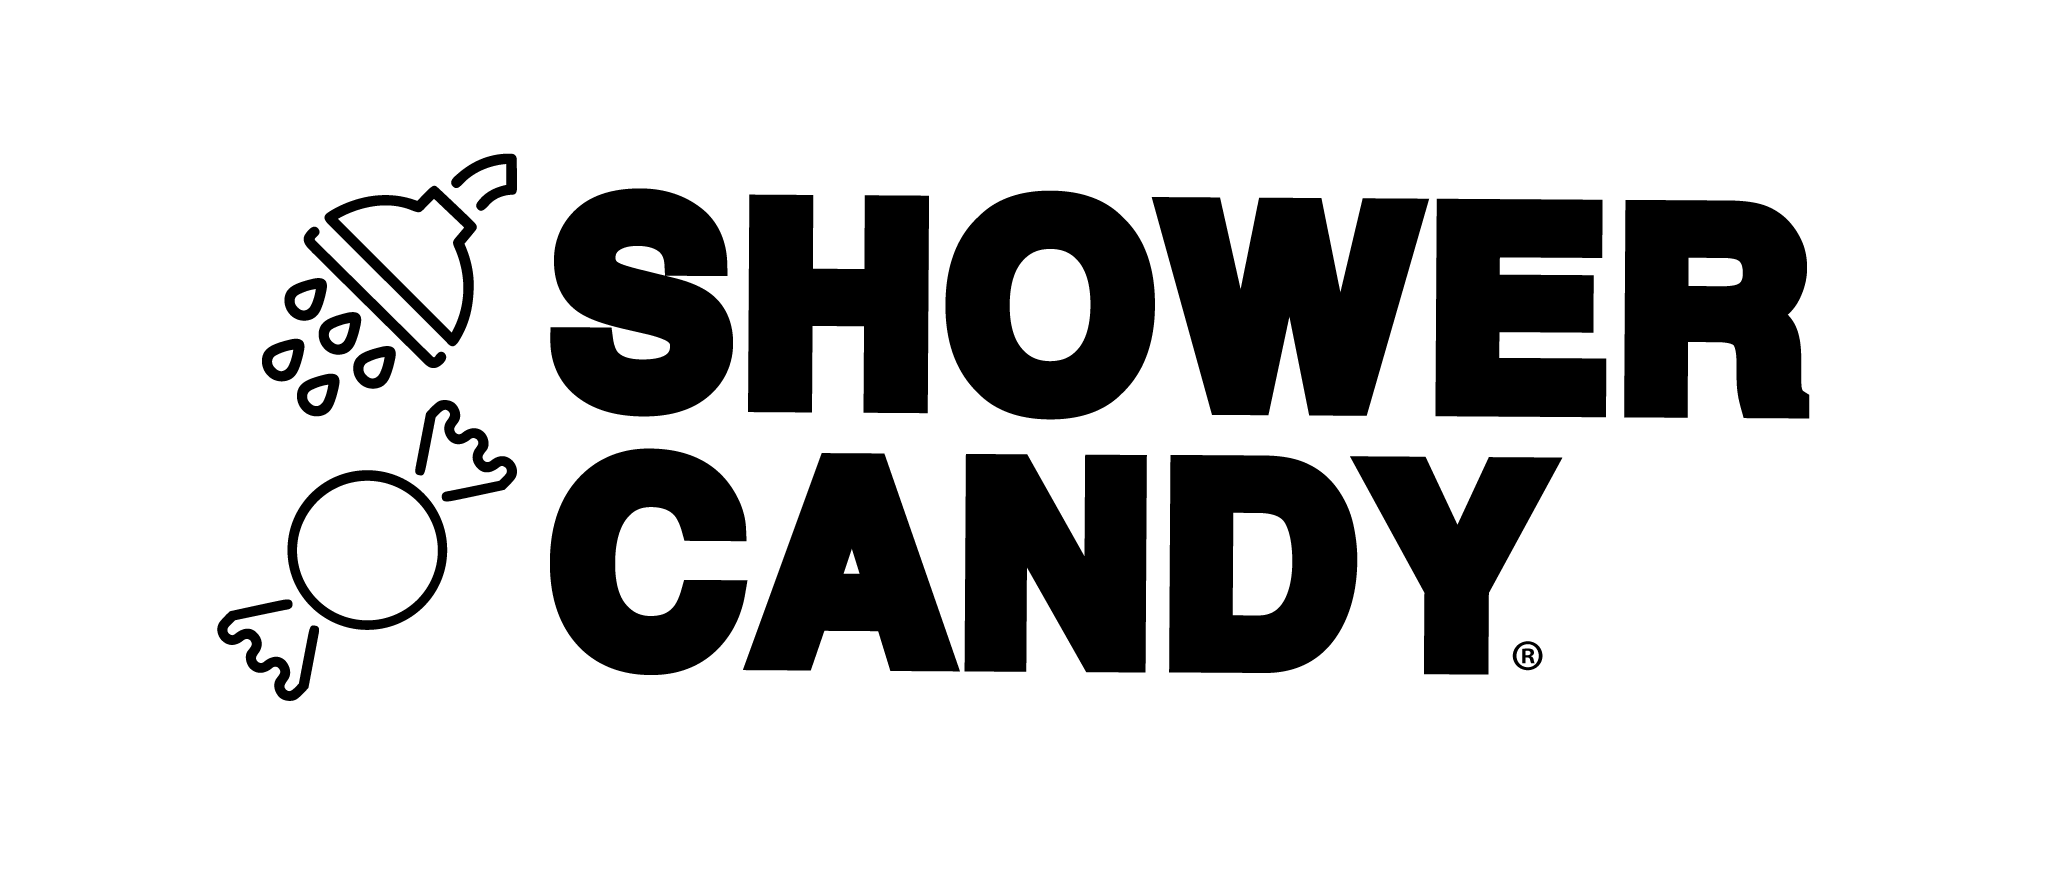 SHOWER CANDY